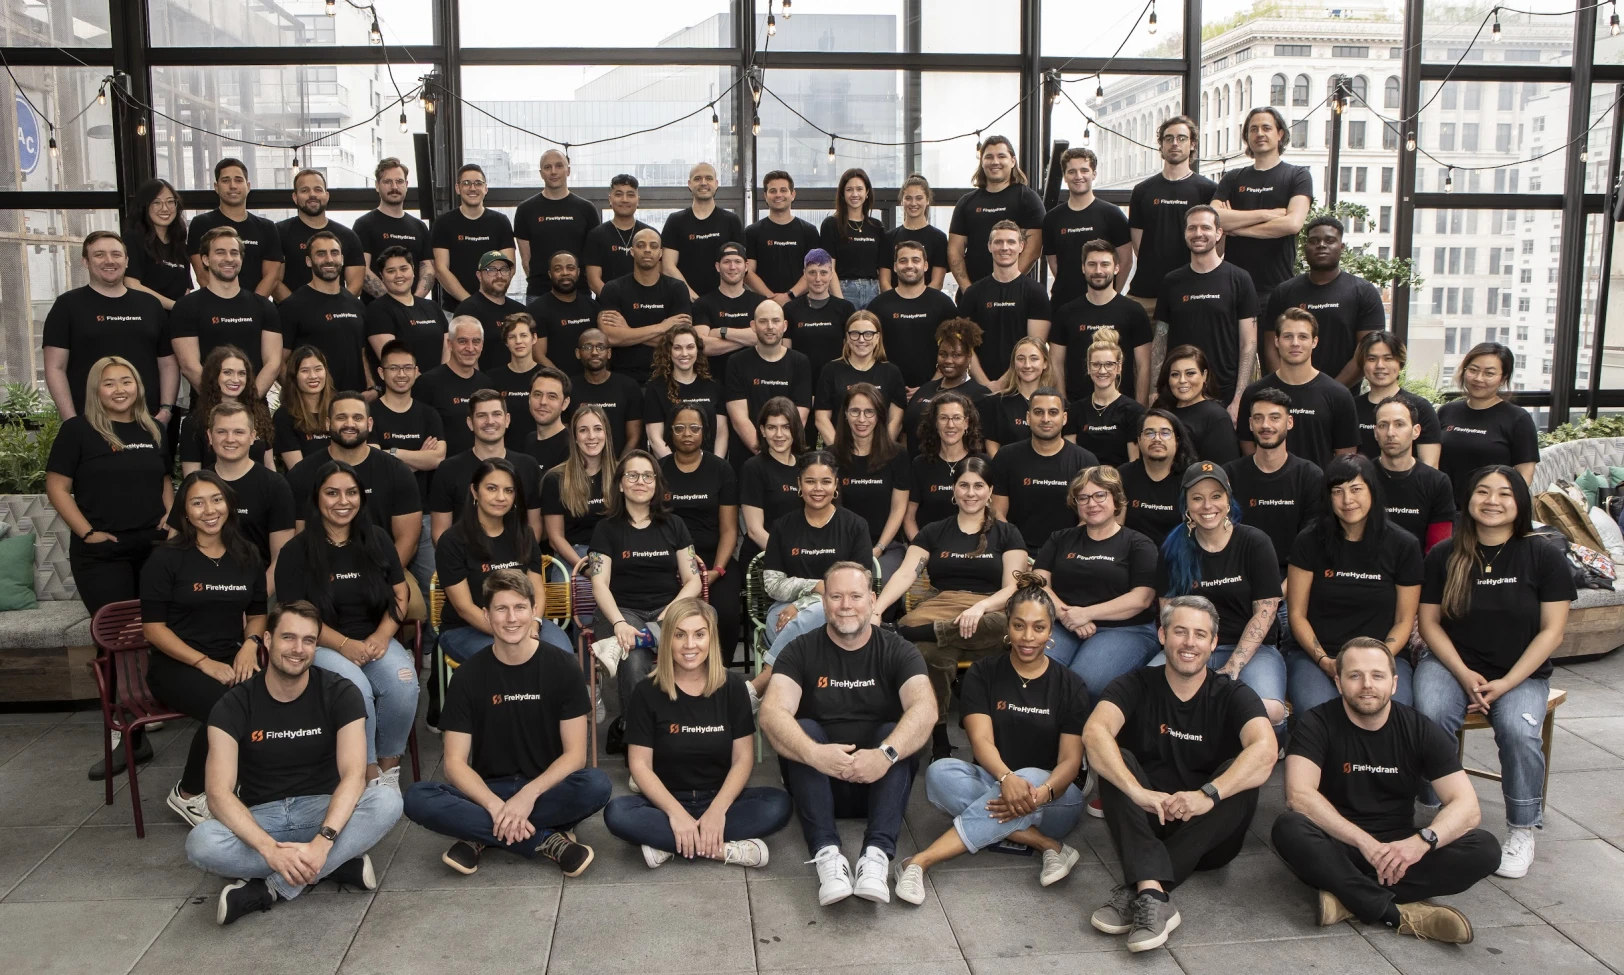 a formal portrait of the entire FireHydrant team standing in rows wearing black t-shirts with the FireHydrant logo on it